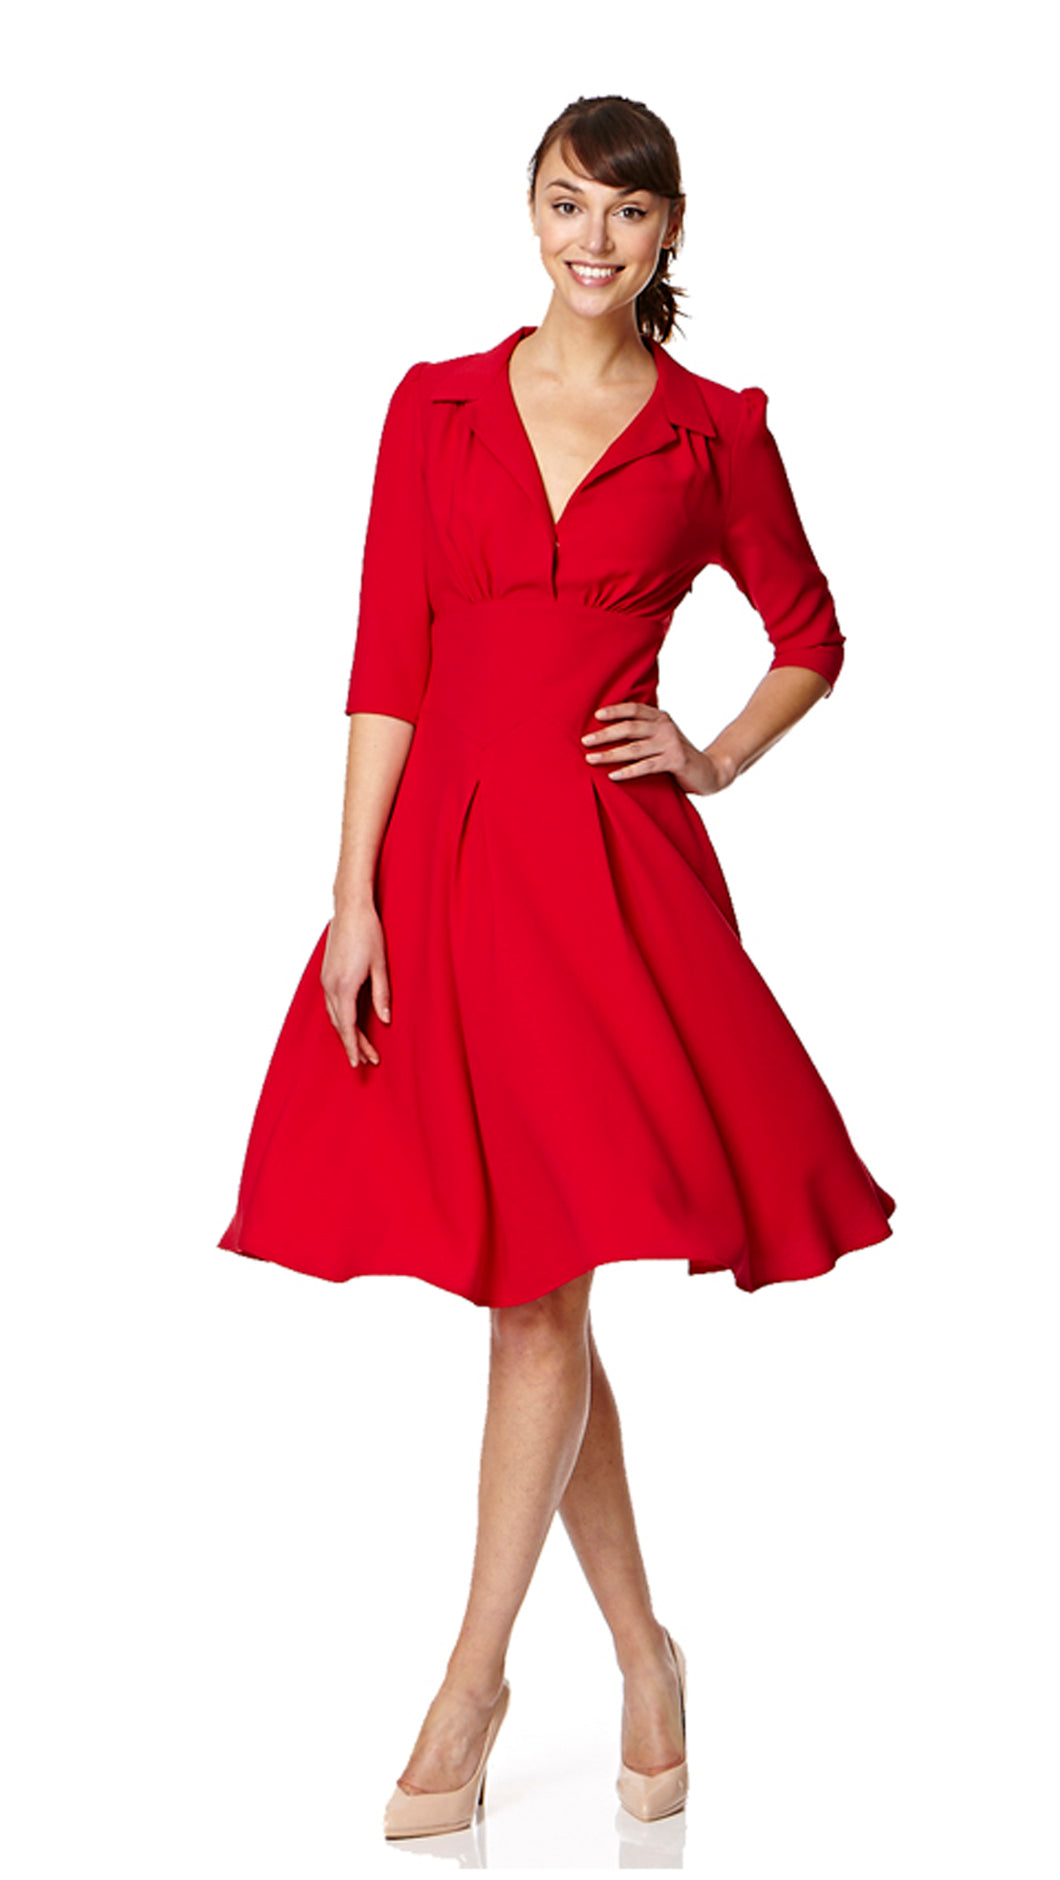 The Dorothy dress in red crepe